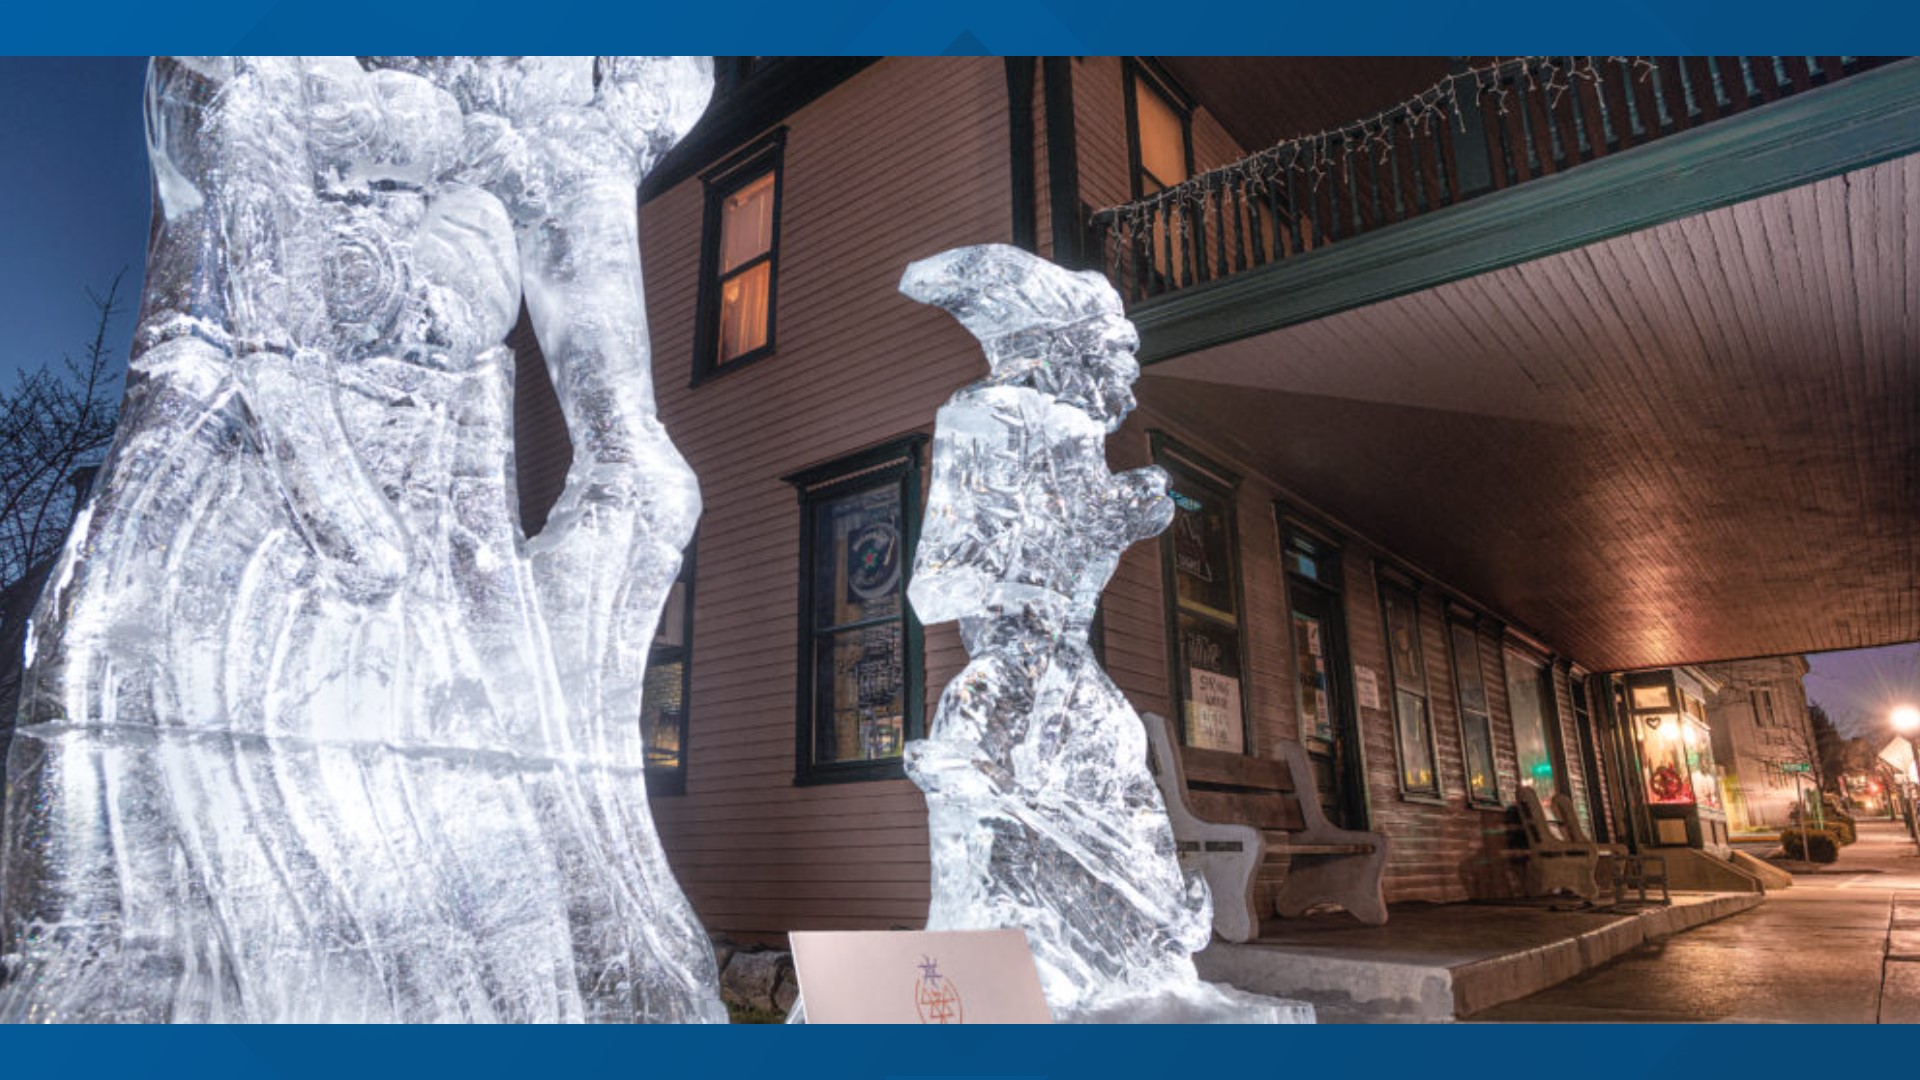 Starting on Friday, this 10-day event will showcase immaculate ice sculptors and fiery family fun.